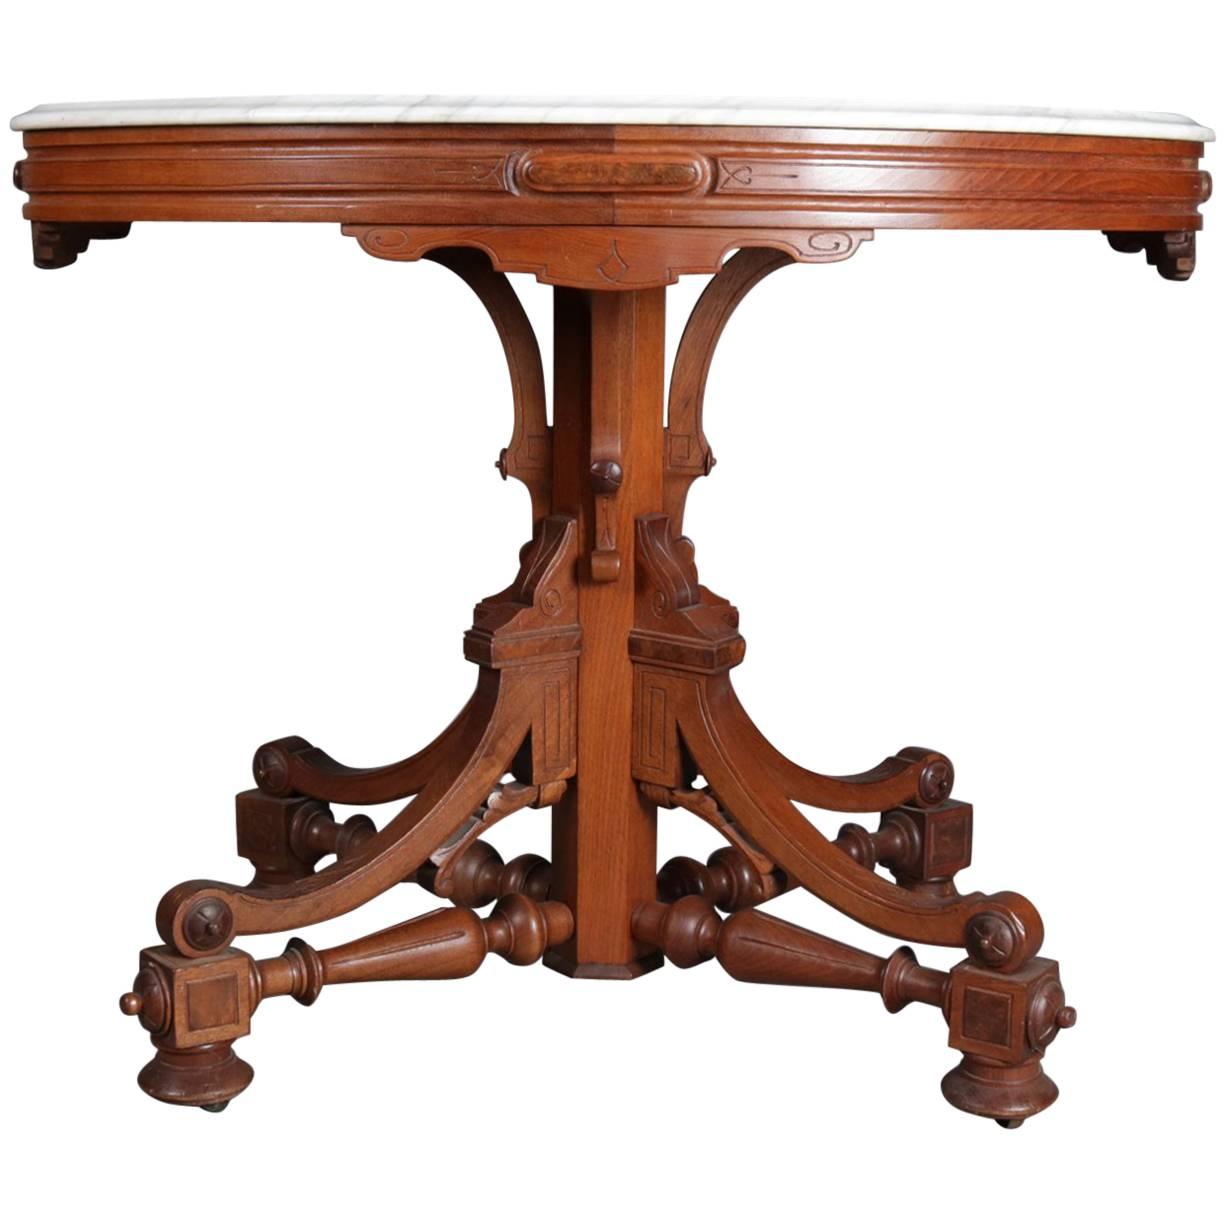 Details about   Antique Marble Top Rolling Carved Wood Parlor Table Victorian Eastlake Style 